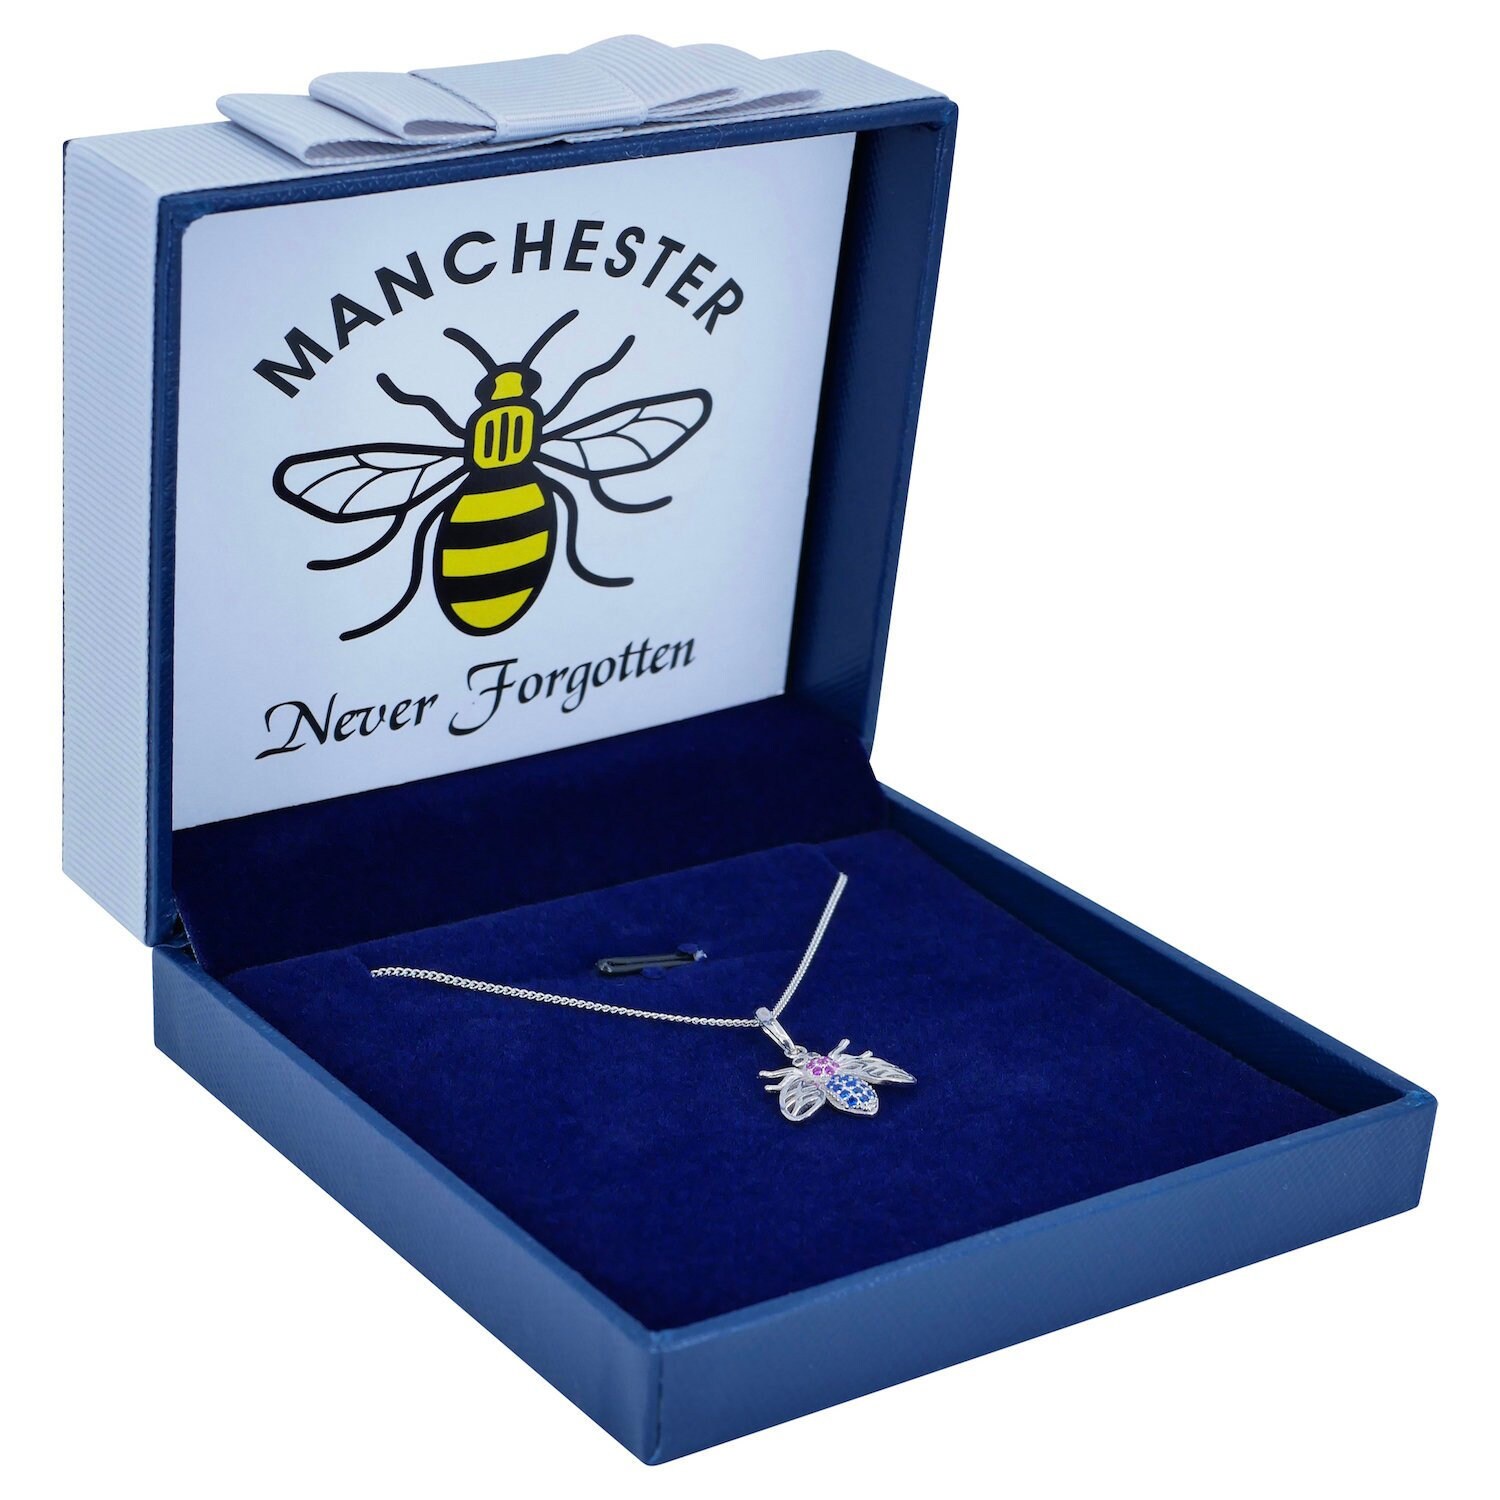 sterling silver Manchester bee pendant necklace